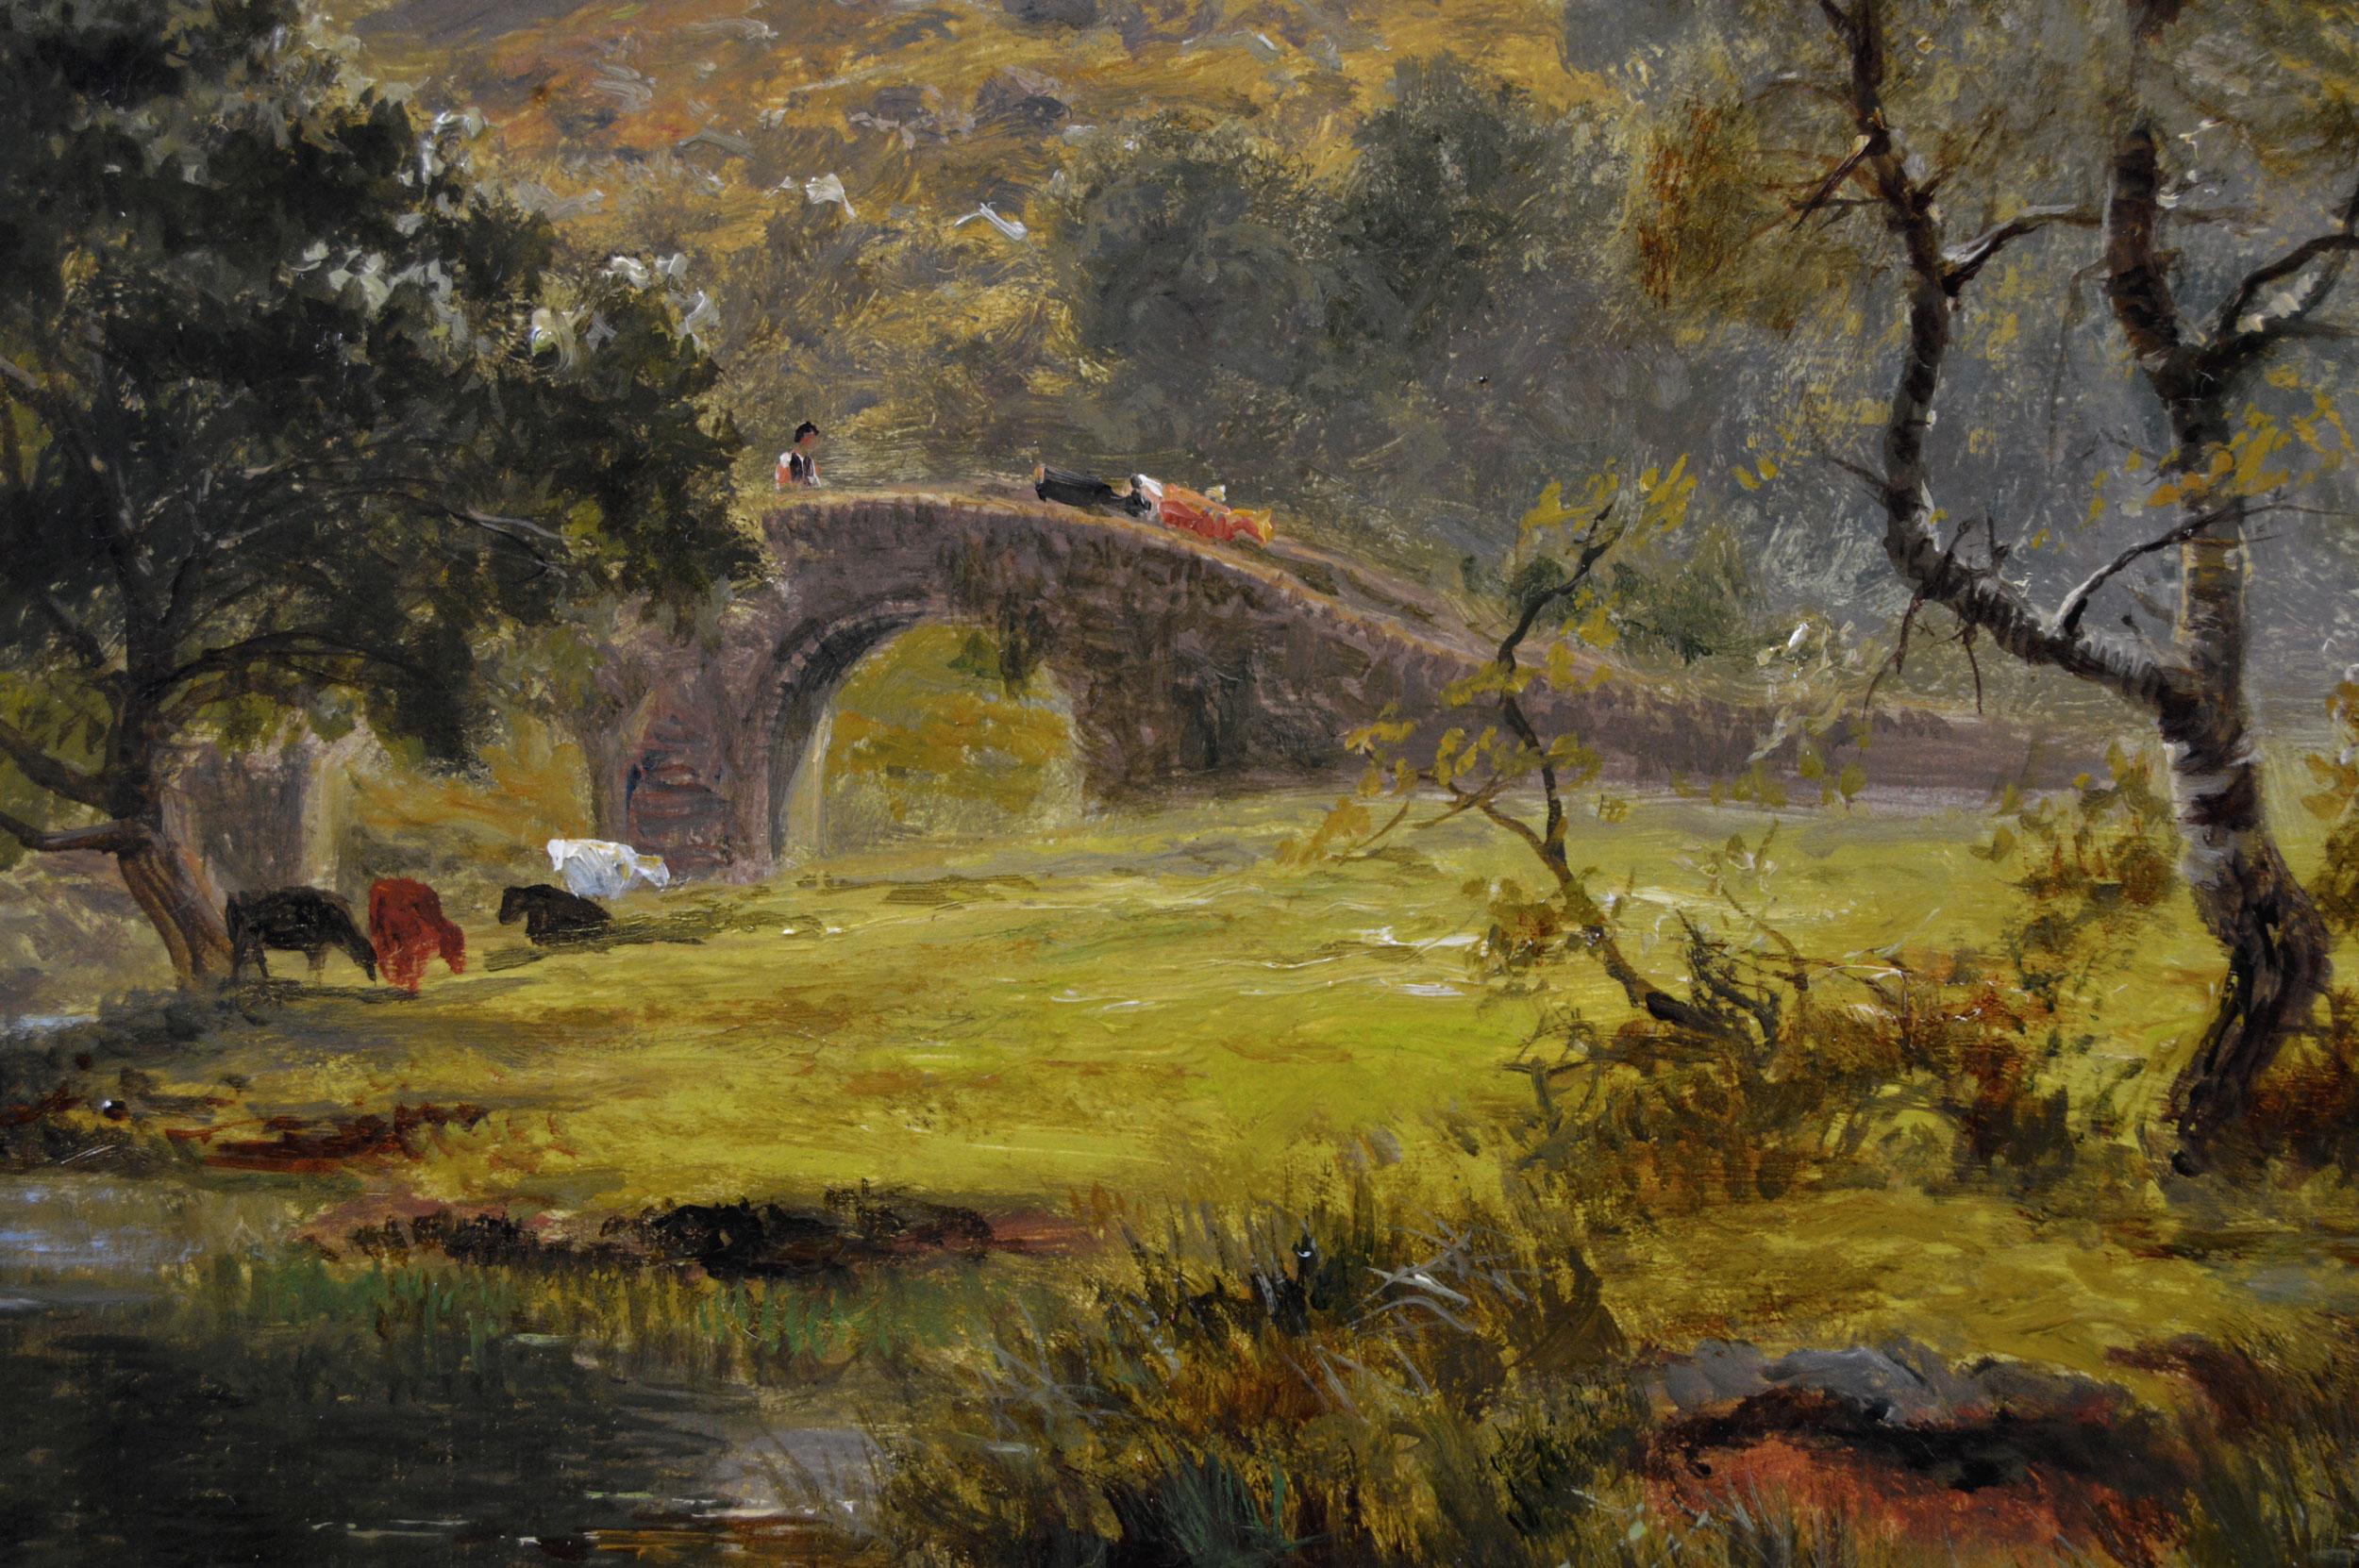 Robert Gallon
British, (1845-1925)
Cattle by the River
Oil on canvas, signed
Image size: 16.5 inches x 12.5 inches 
Size including frame: 23 inches x 19 inches

Robert Gallon was a landscape painter born in Deptford, Kent in 1845 to the artist